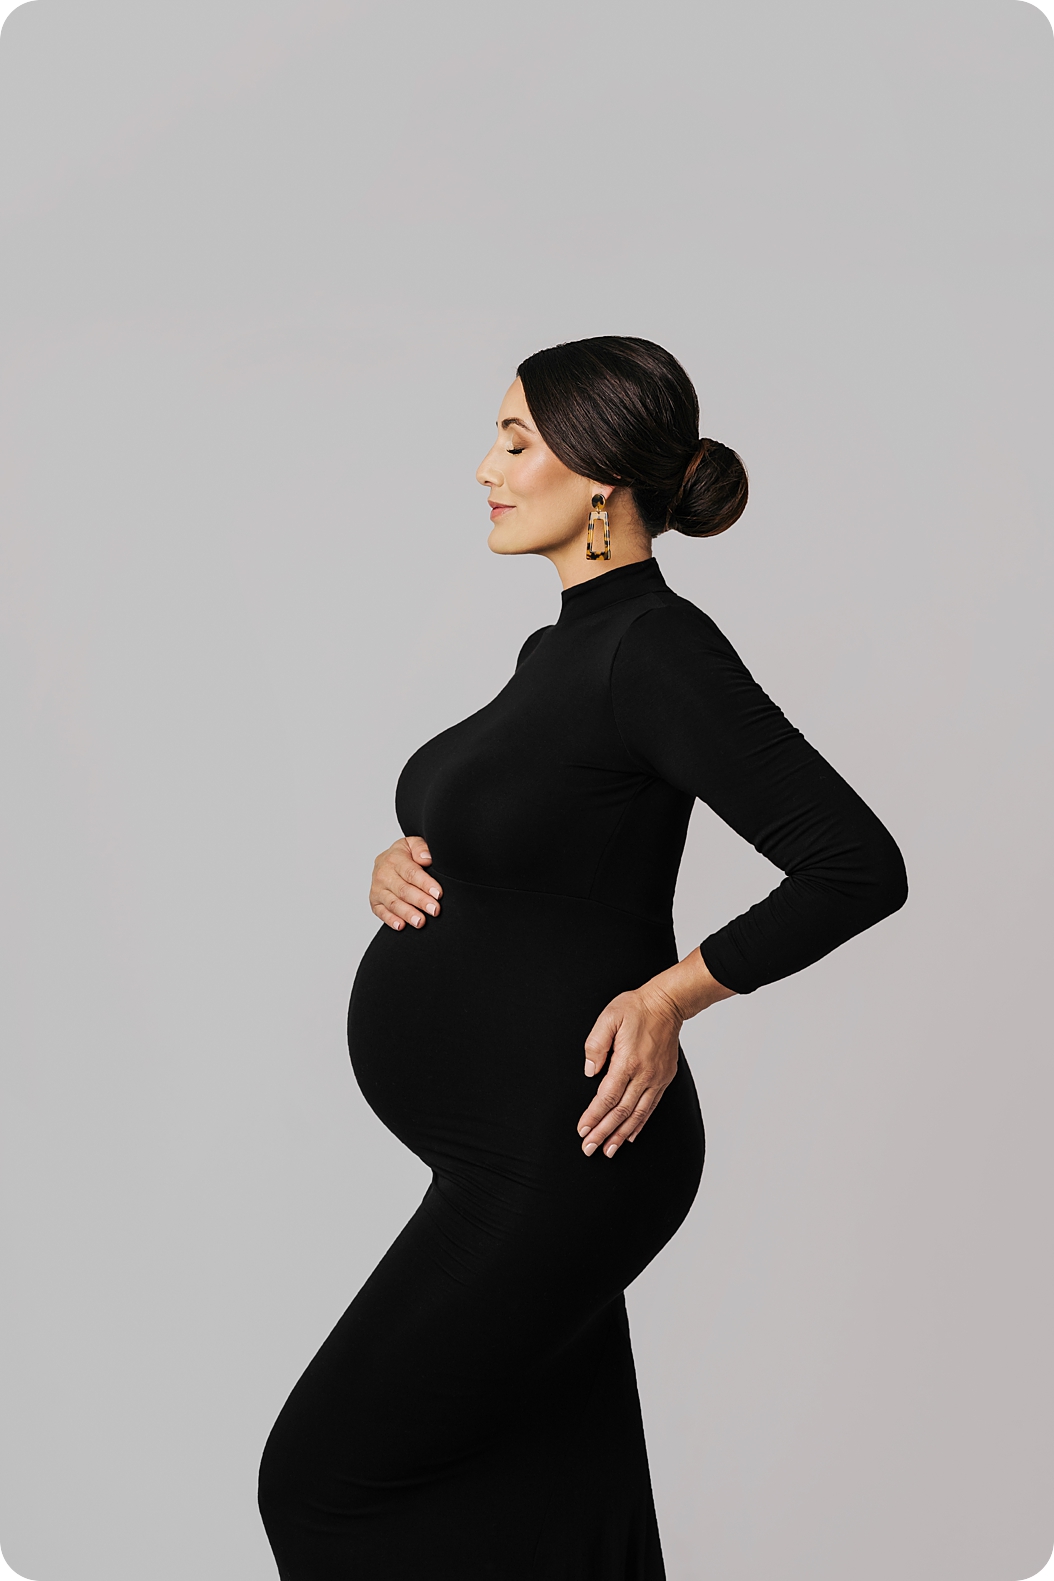 mom stands with eyes closed and hair in bun with leopard inspired earrings holding baby belly during Classic Studio Maternity Portraits